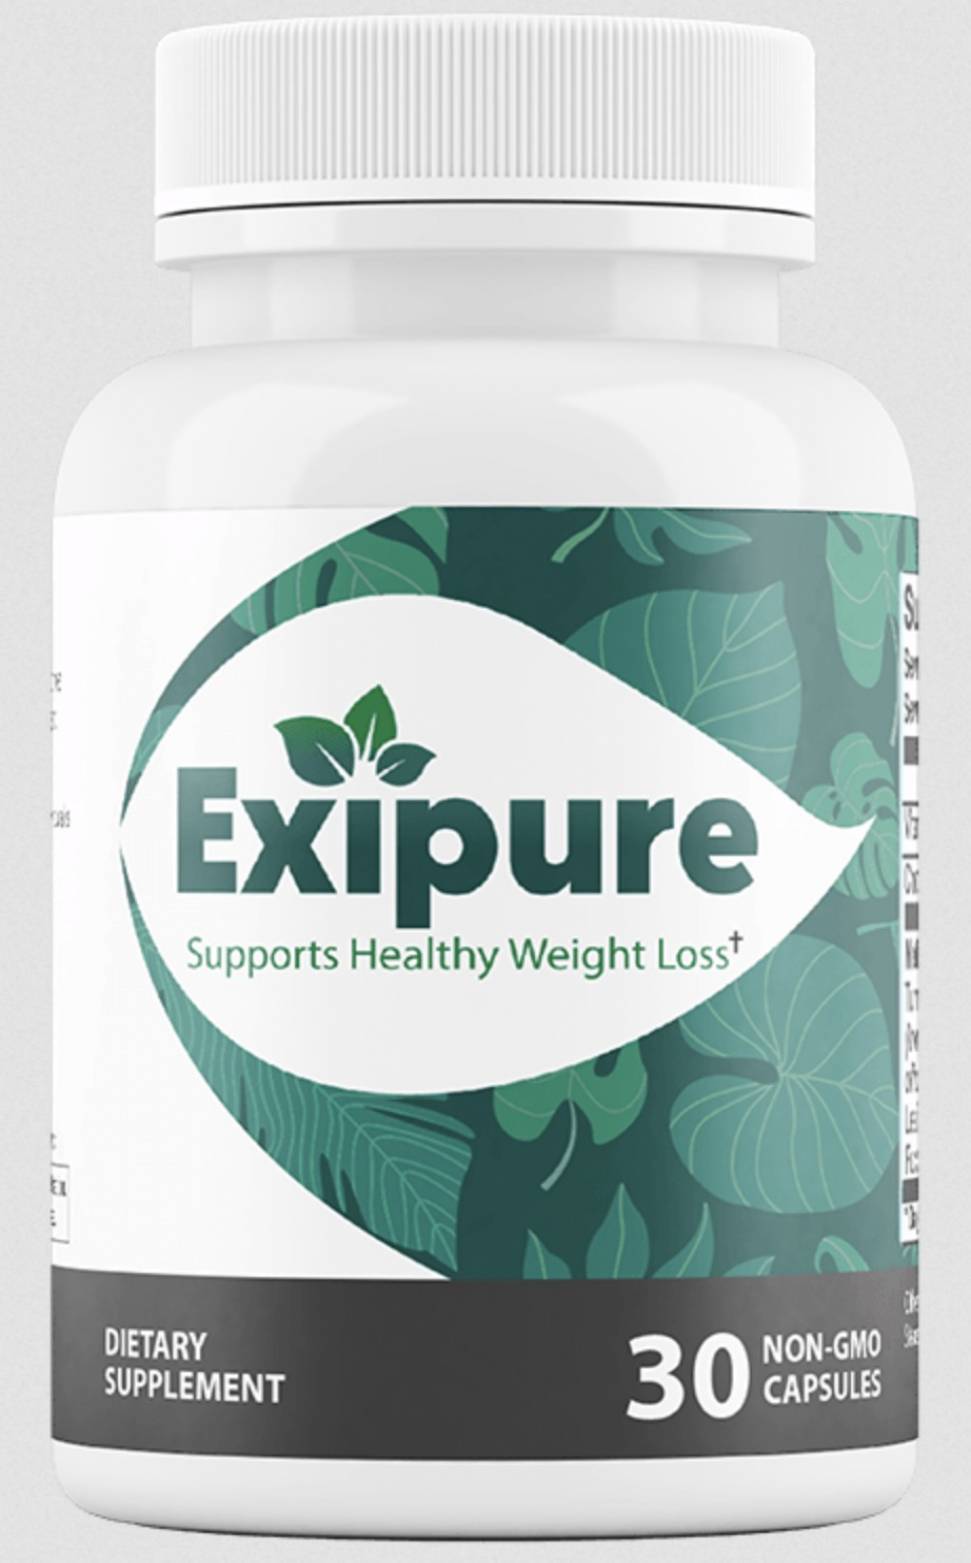 Exipure Real Review